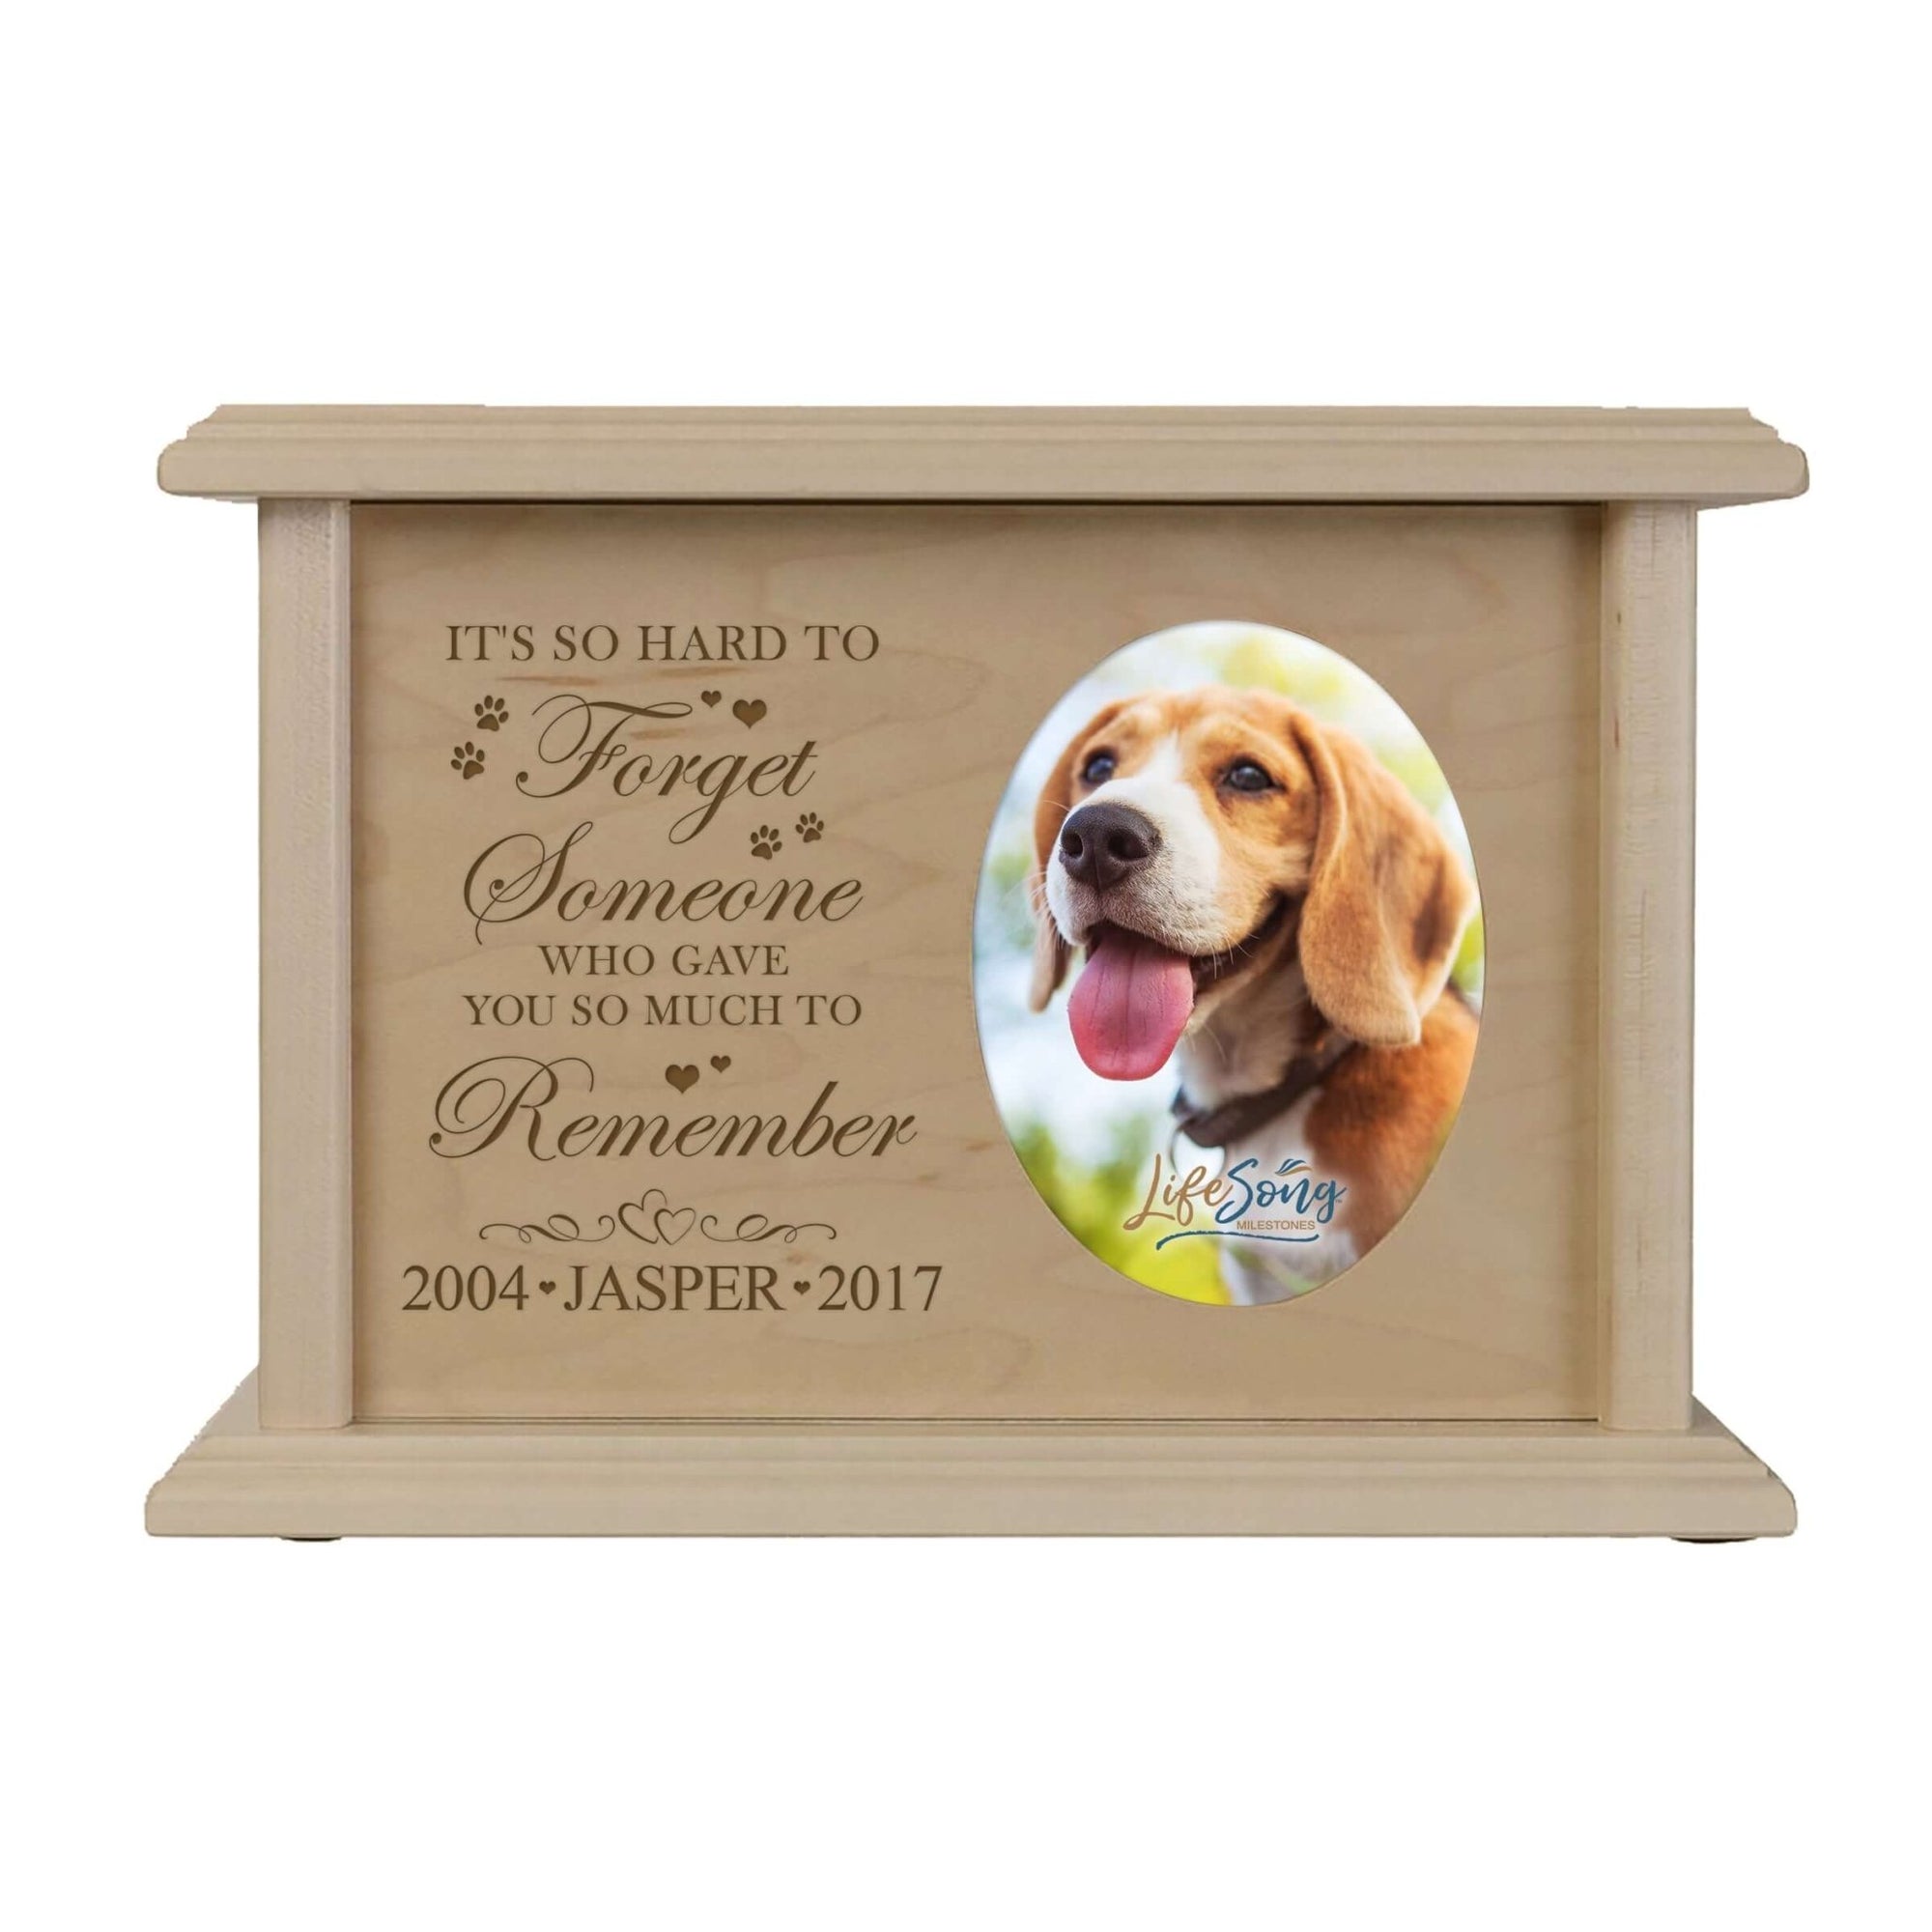 Pet Memorial Picture Cremation Urn Box for Dog or Cat - It's So Hard To Forget - LifeSong Milestones